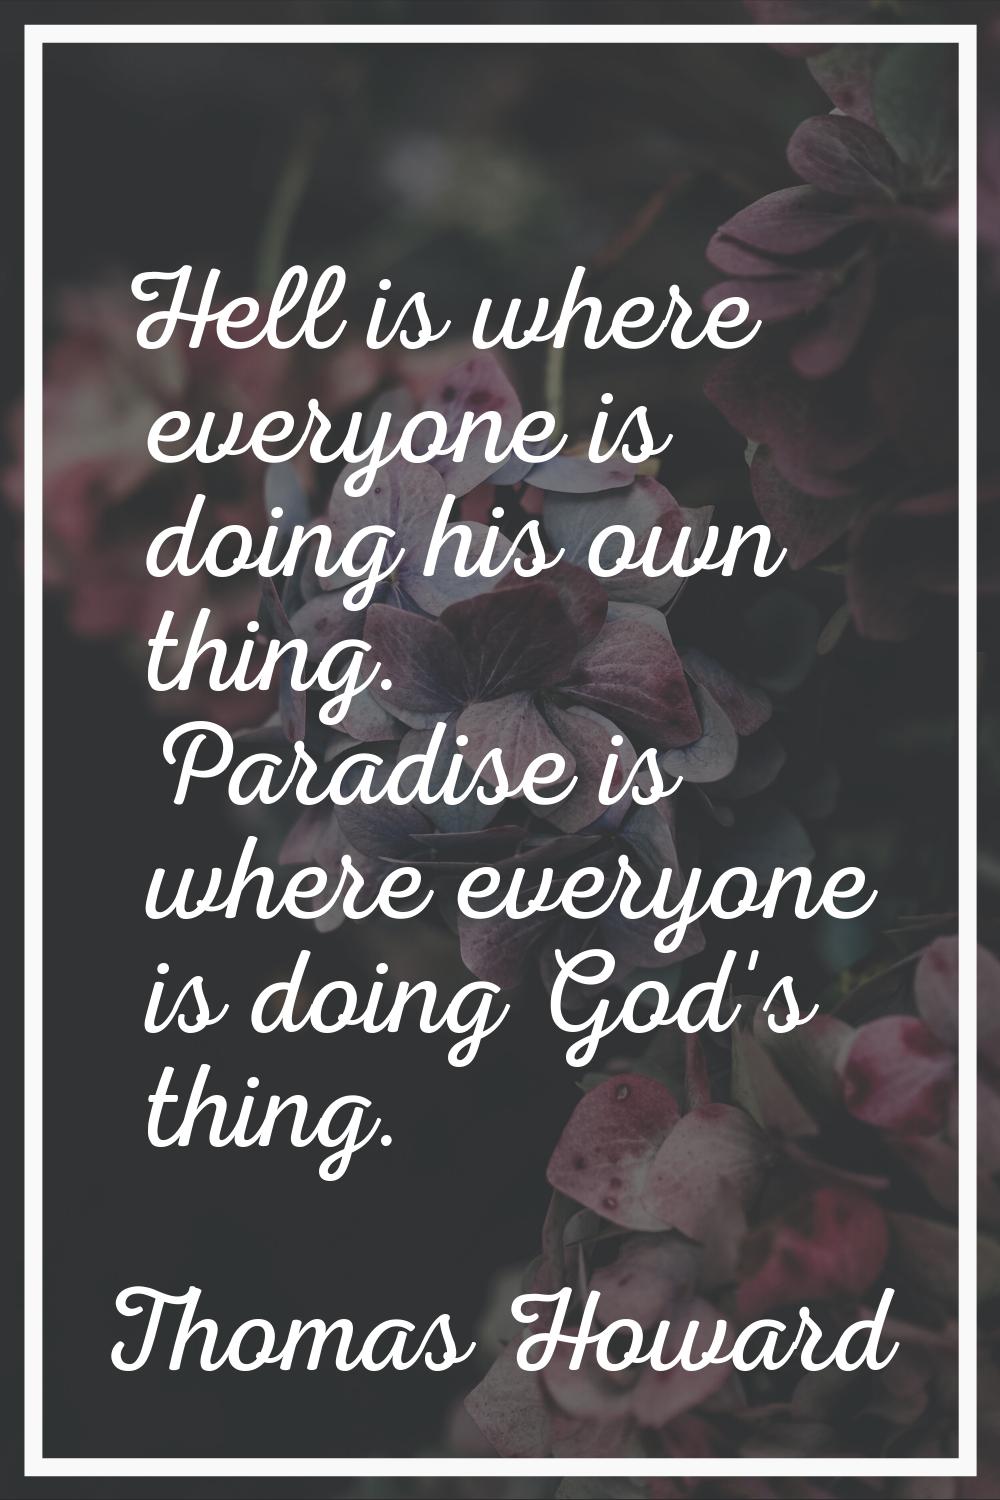 Hell is where everyone is doing his own thing. Paradise is where everyone is doing God's thing.